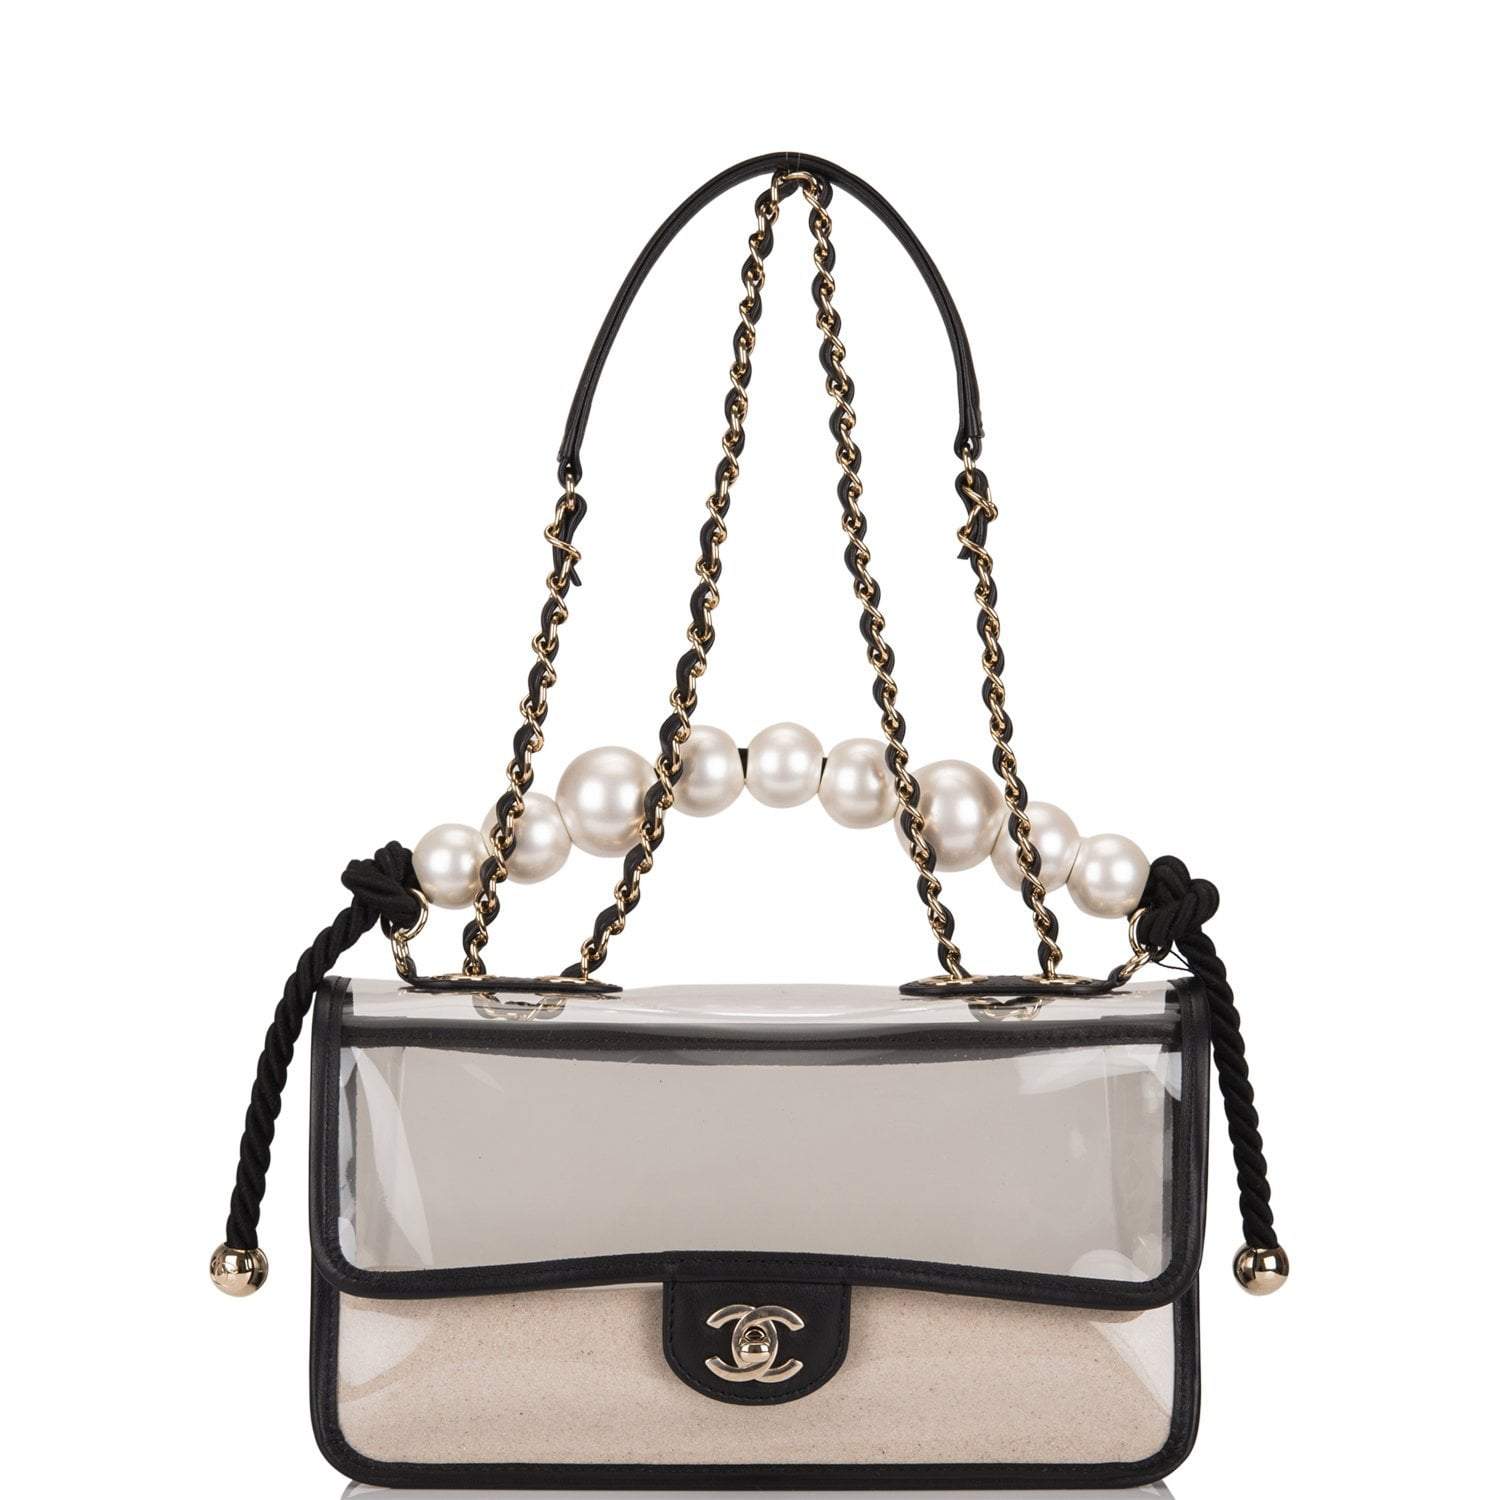 CHANEL  BLACK CHIC PEARLS SMALL FLAP BAG IN GOATSKIN LEATHER WITH MATTE  GOLD HARDWARE  Handbags  Accessories  2020  Sothebys